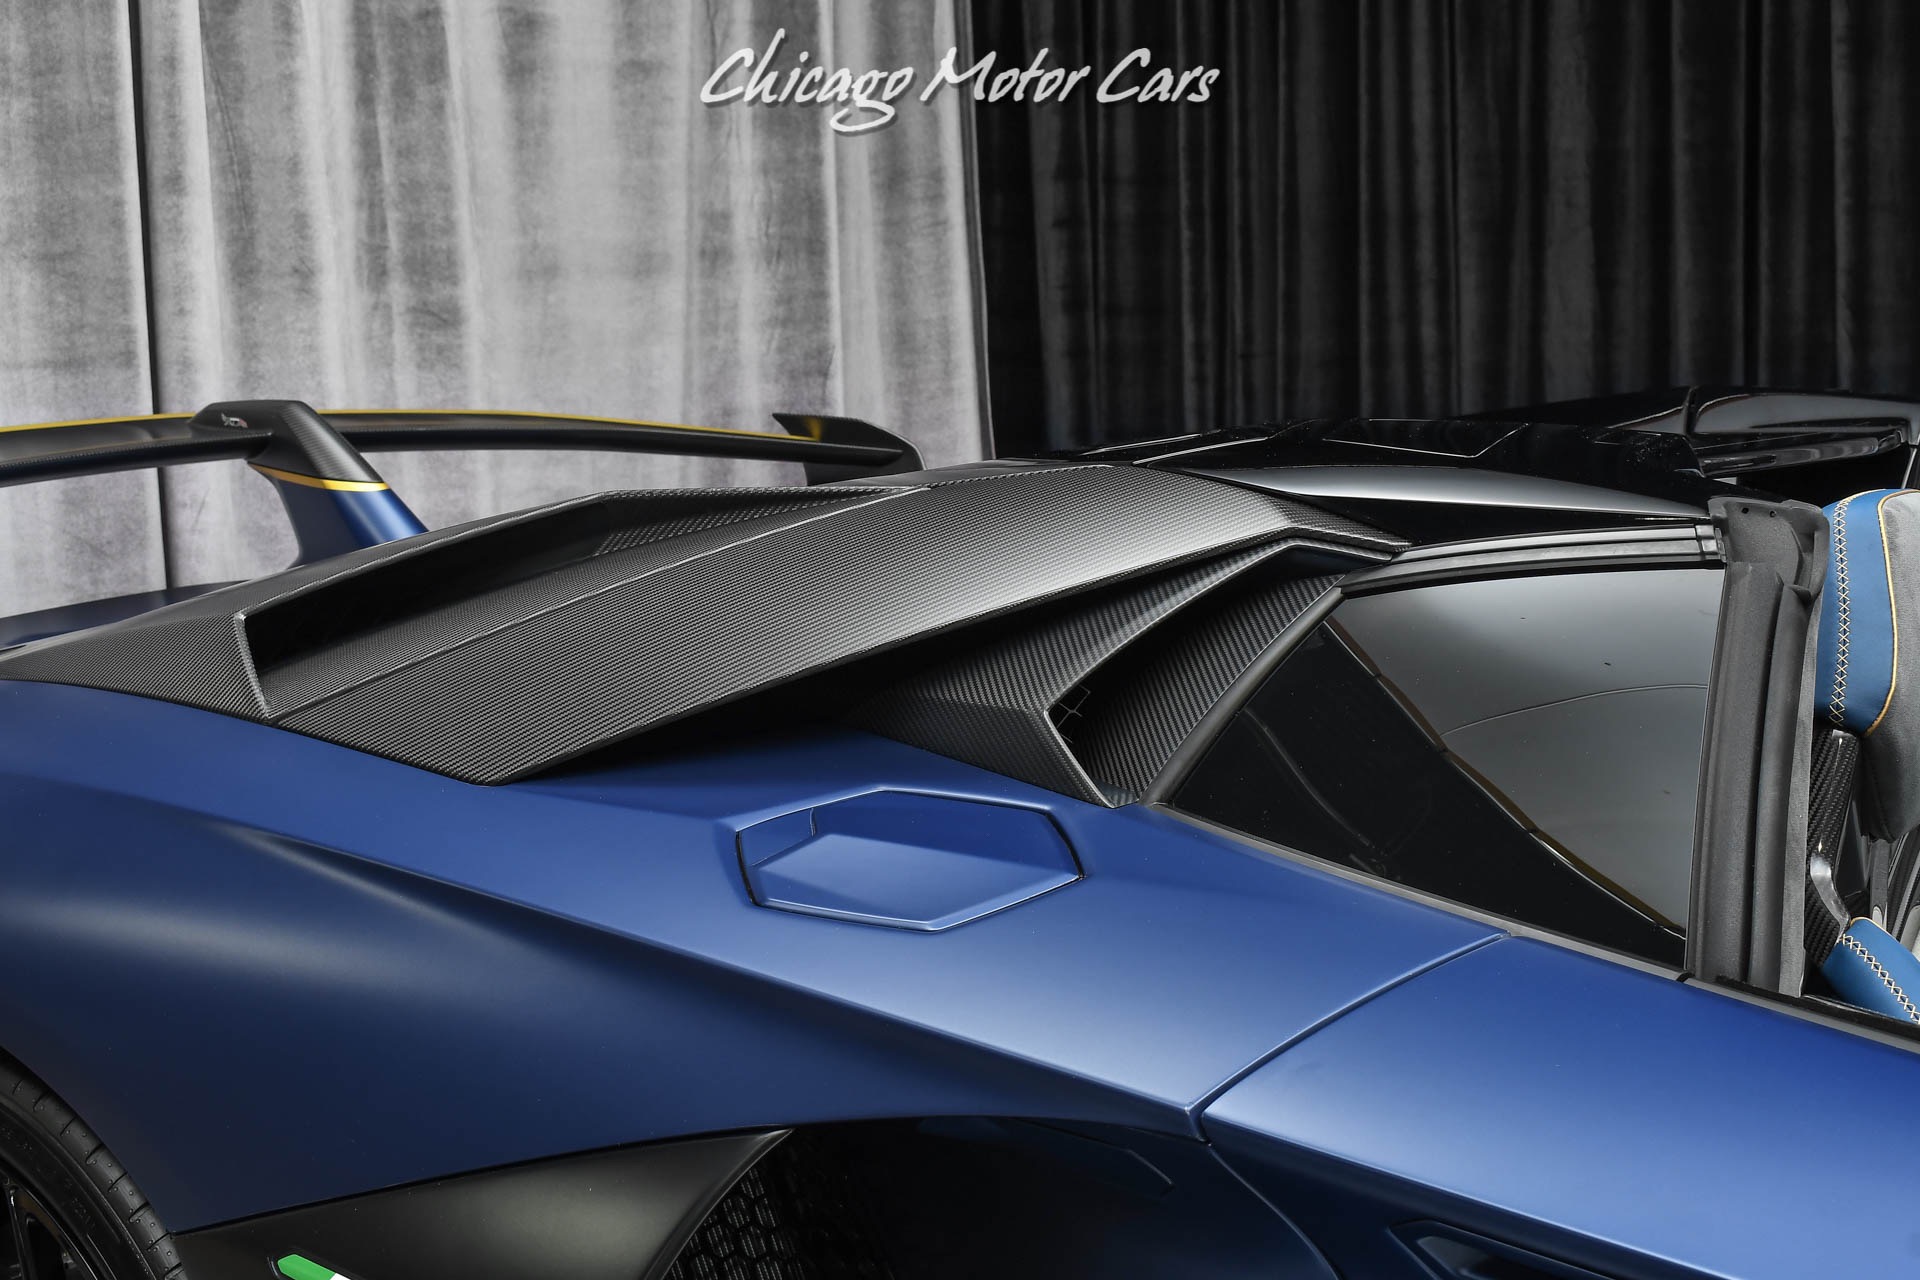 Used-2020-Lamborghini-Aventador-LP770-4-SVJ-63-Roadster-Extremely-RARE-Blu-Emera-163-Made-Collector-Quality-FULL-PPF